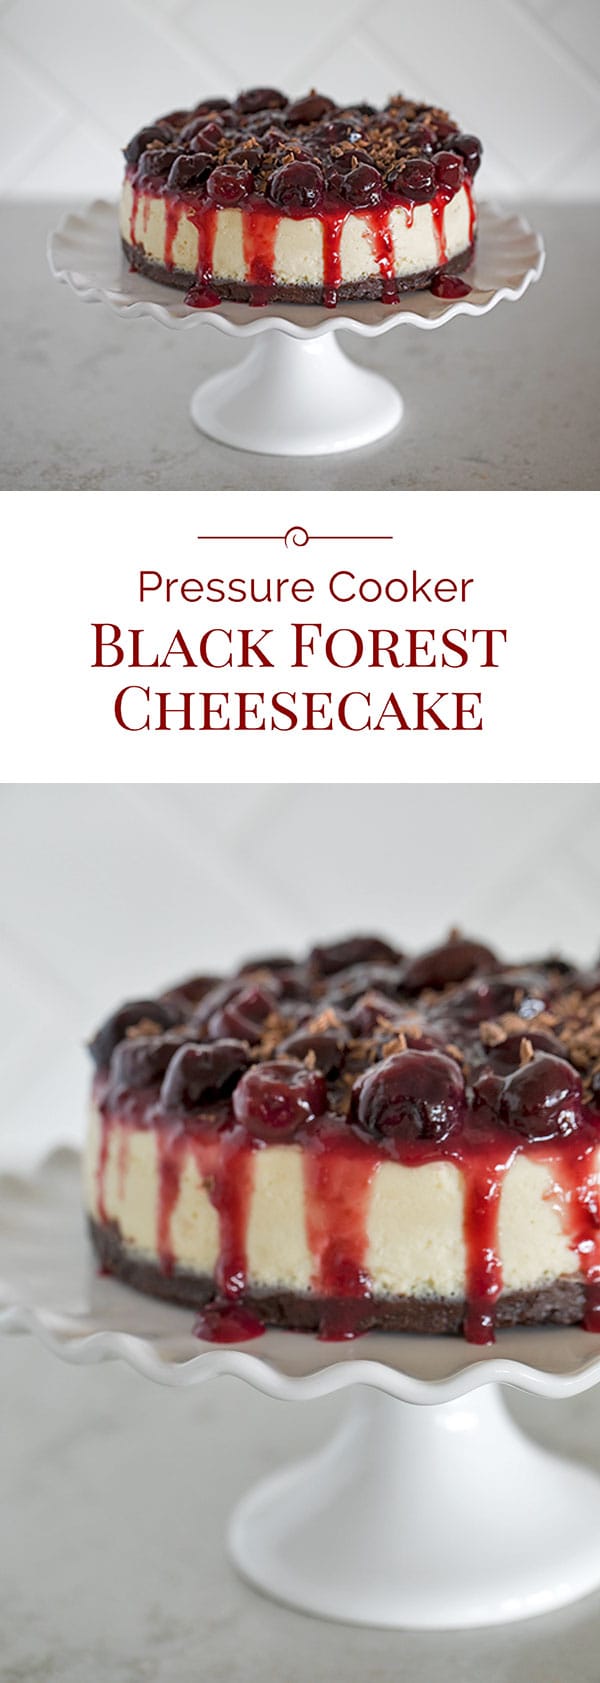 Pressure-Cooker-Black-Forest-Cheesecake-collage